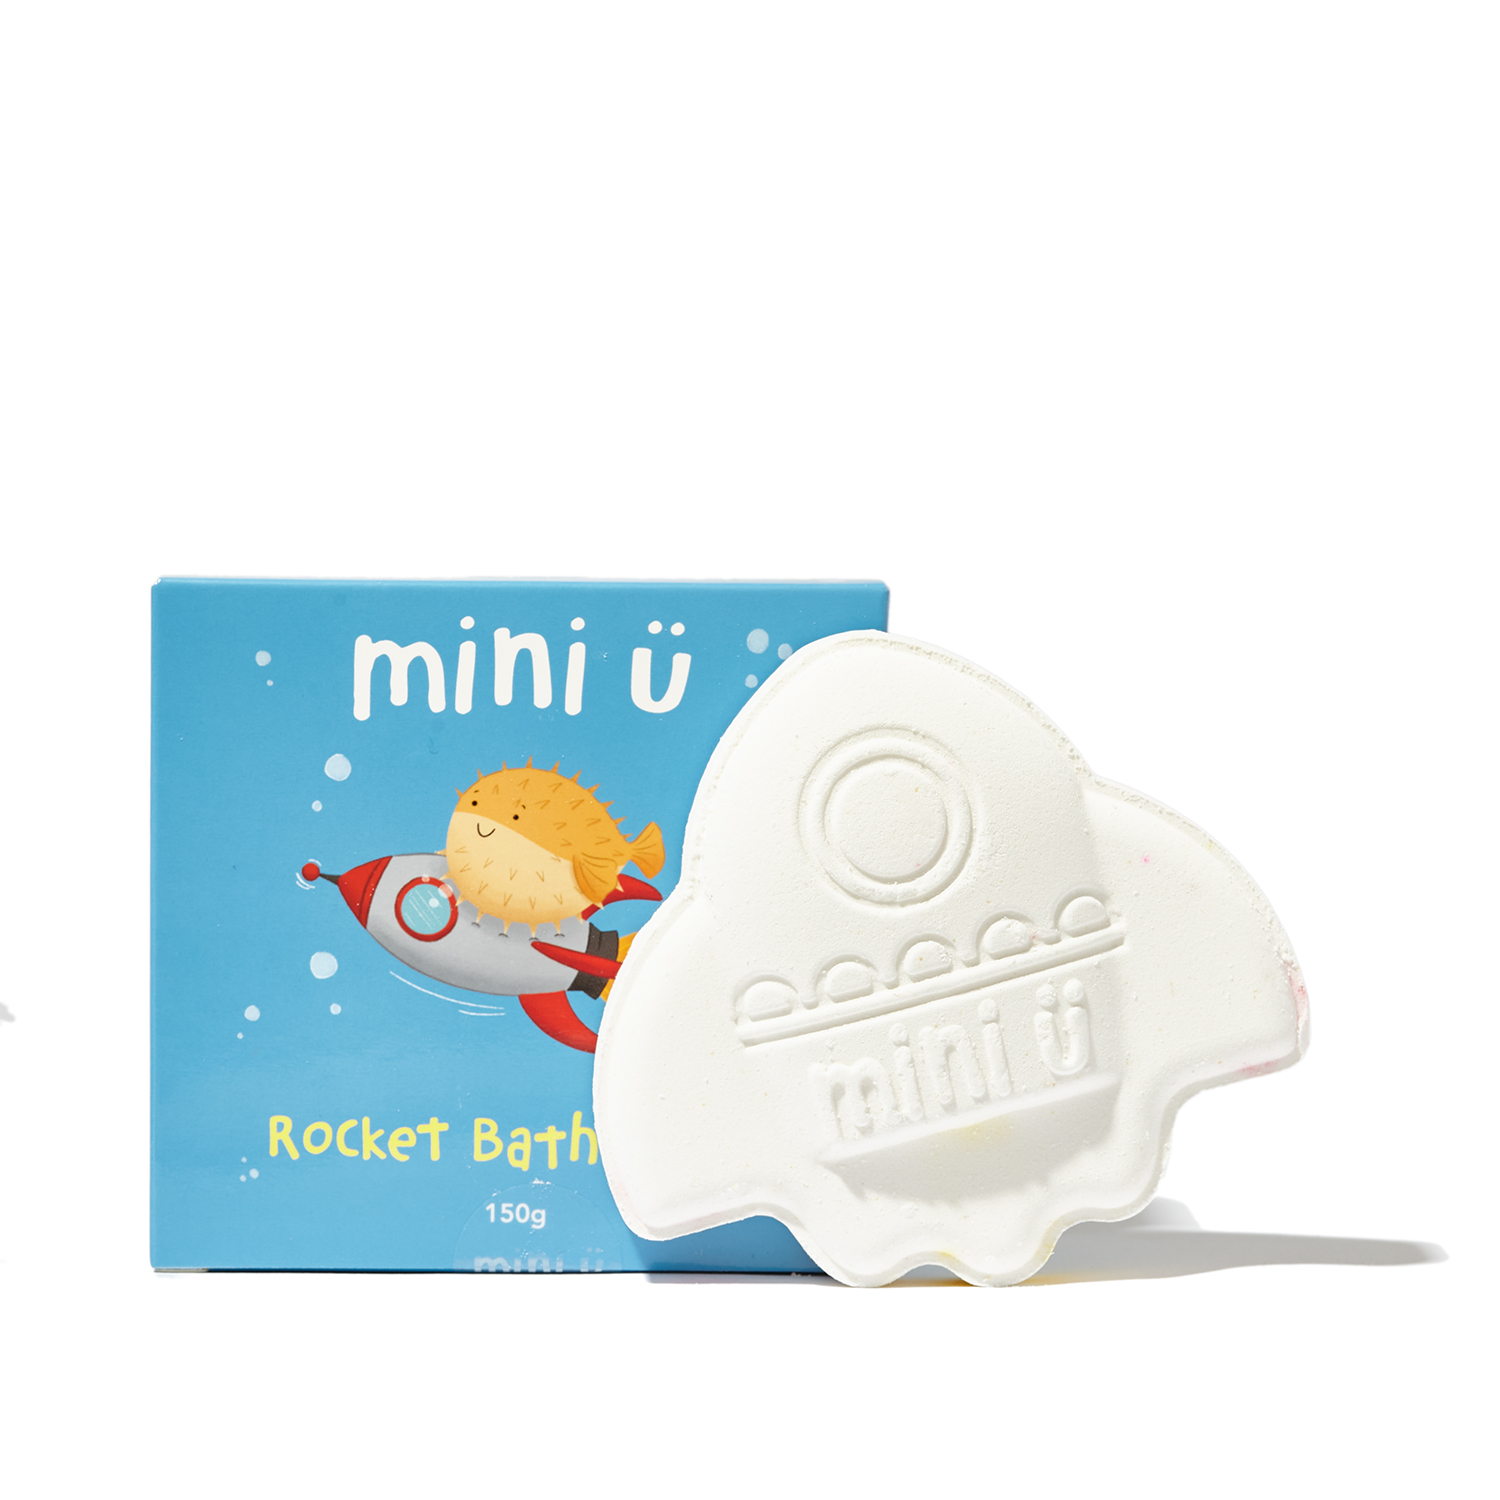 rocket bath bomb and box for kids